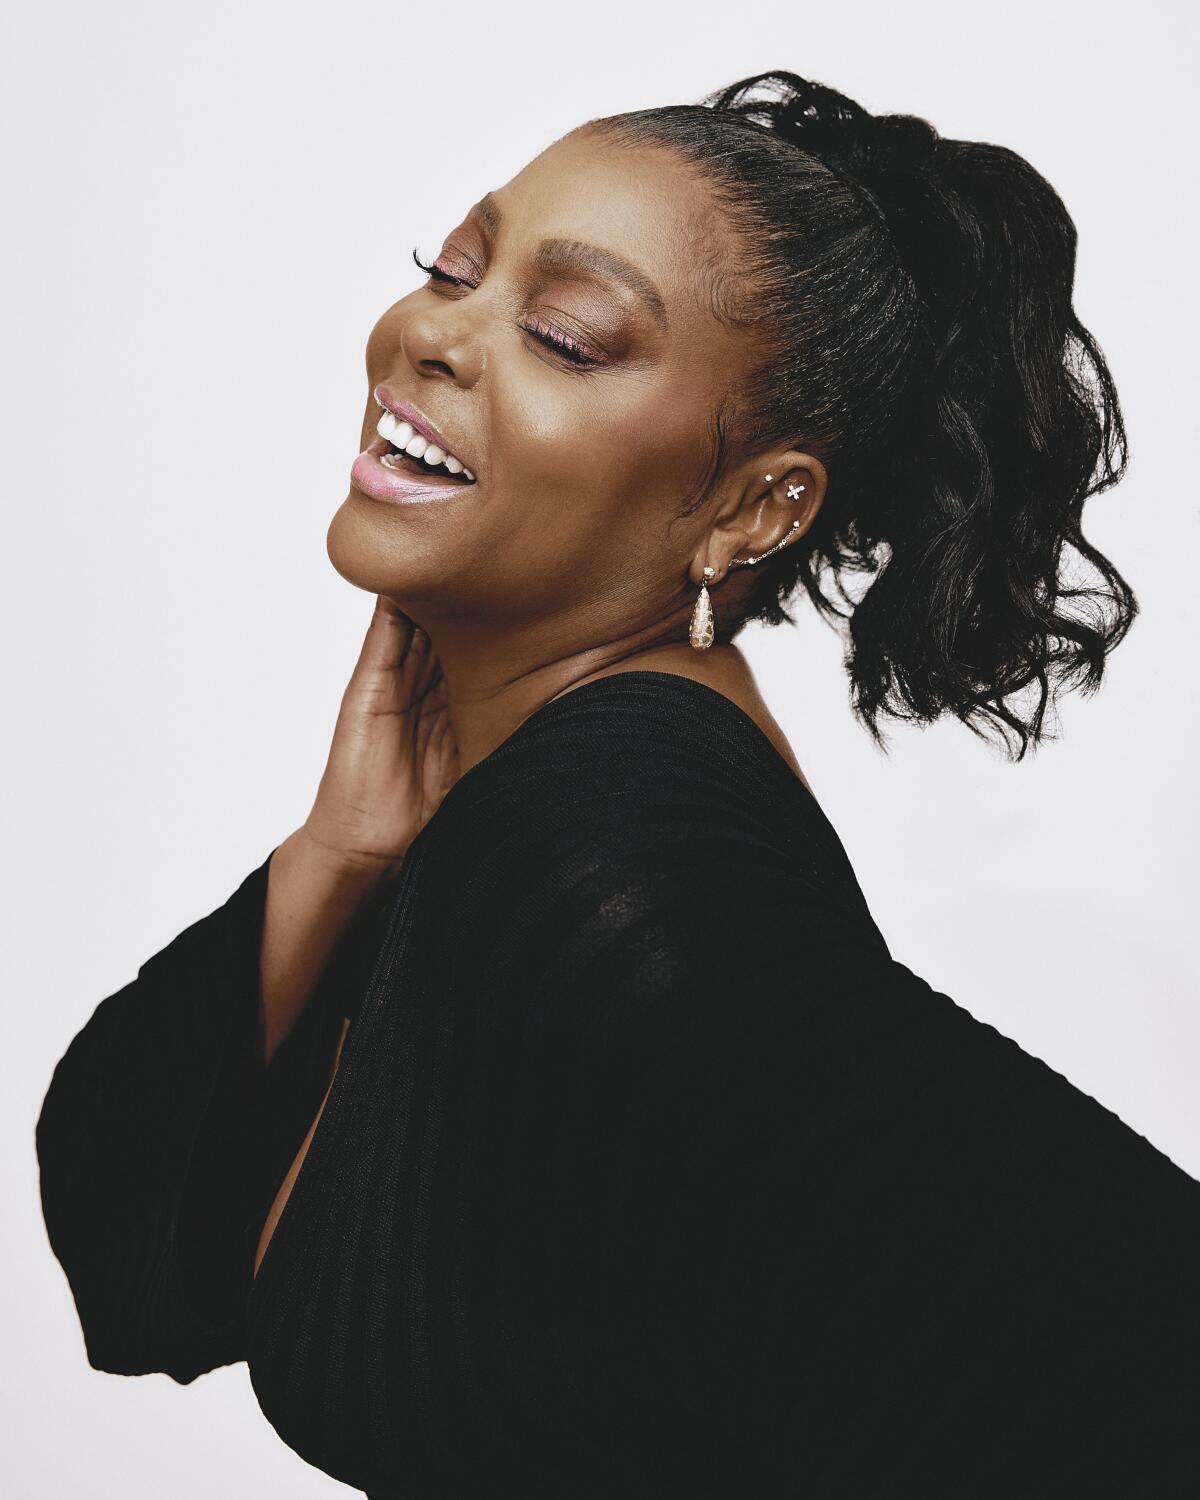 Taraji P. Henson closes her eyes as she laughs during a portrait shoot.